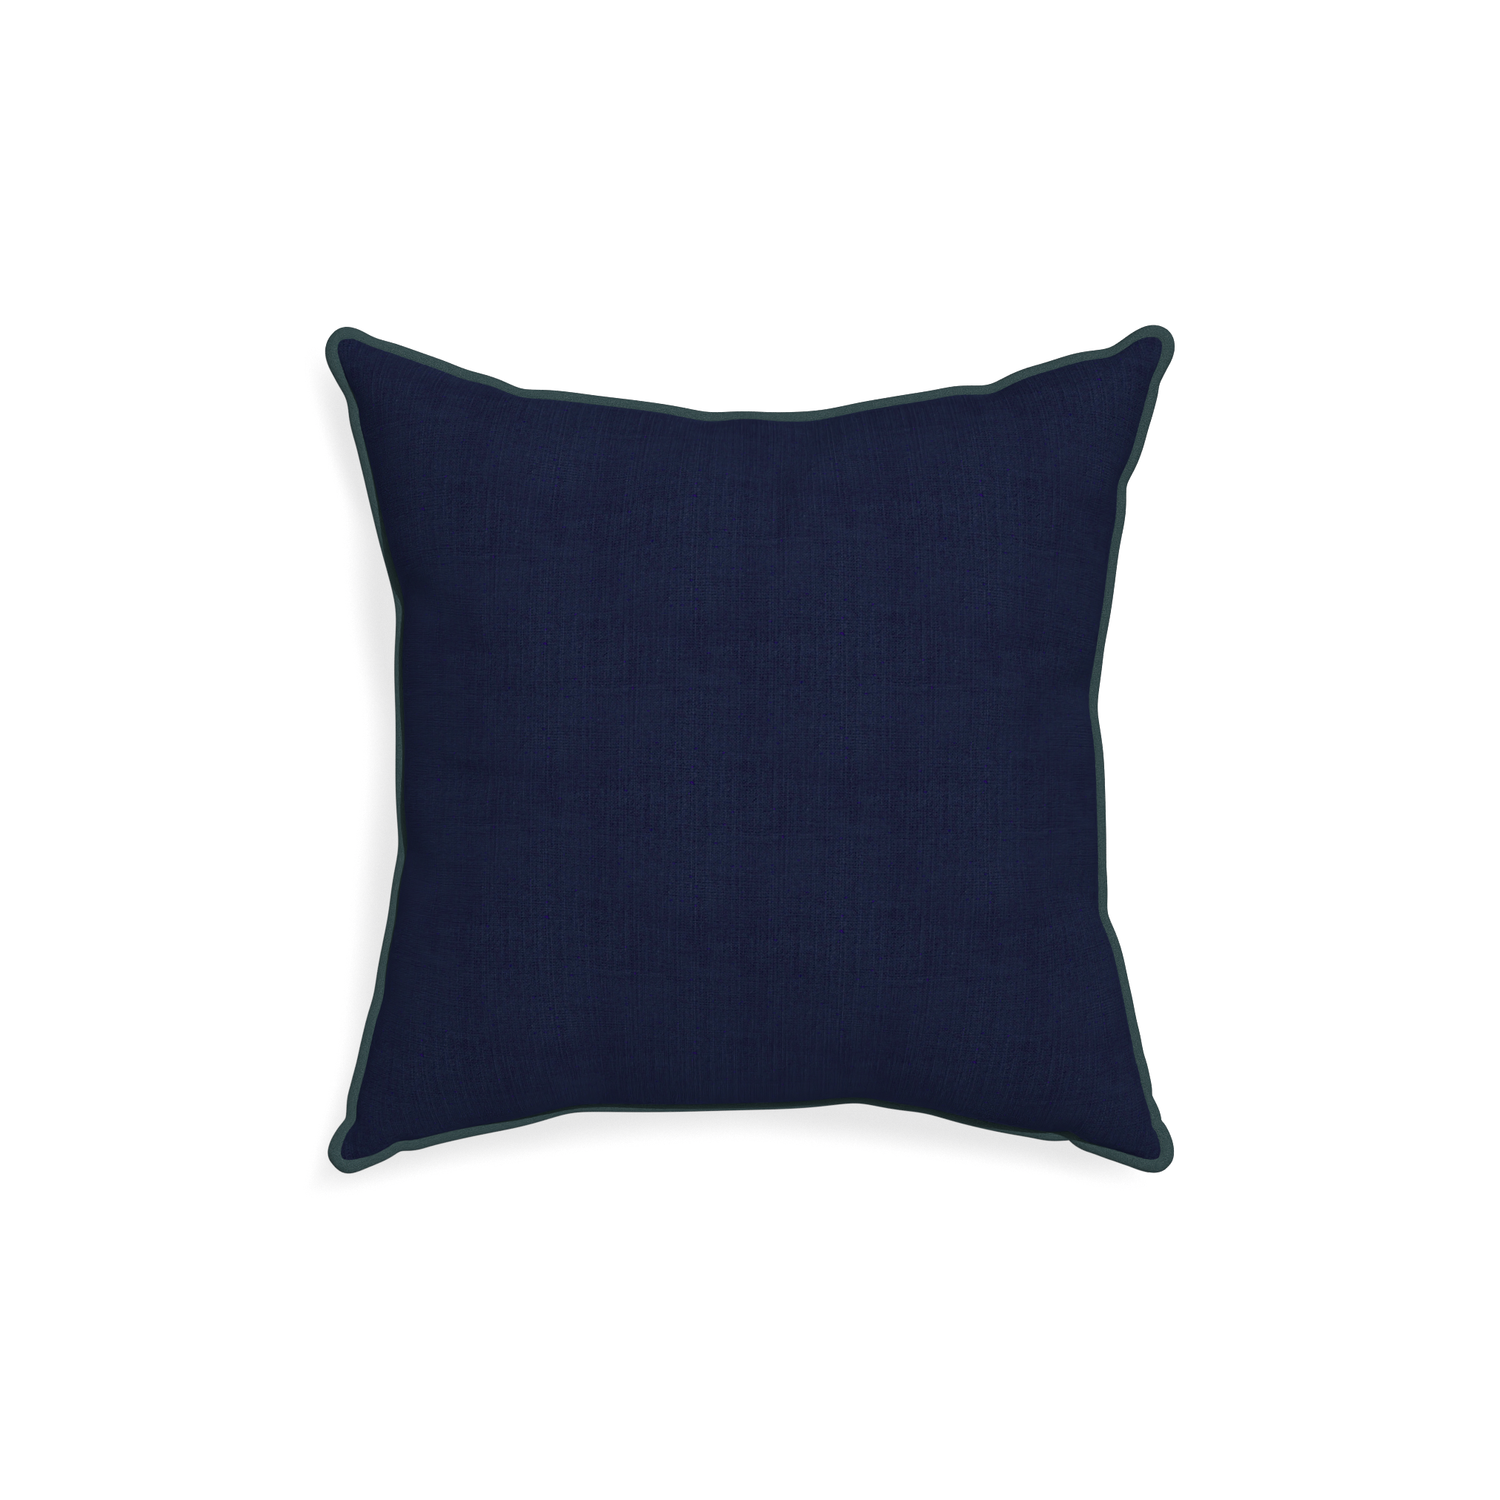 18-square midnight custom navy bluepillow with p piping on white background